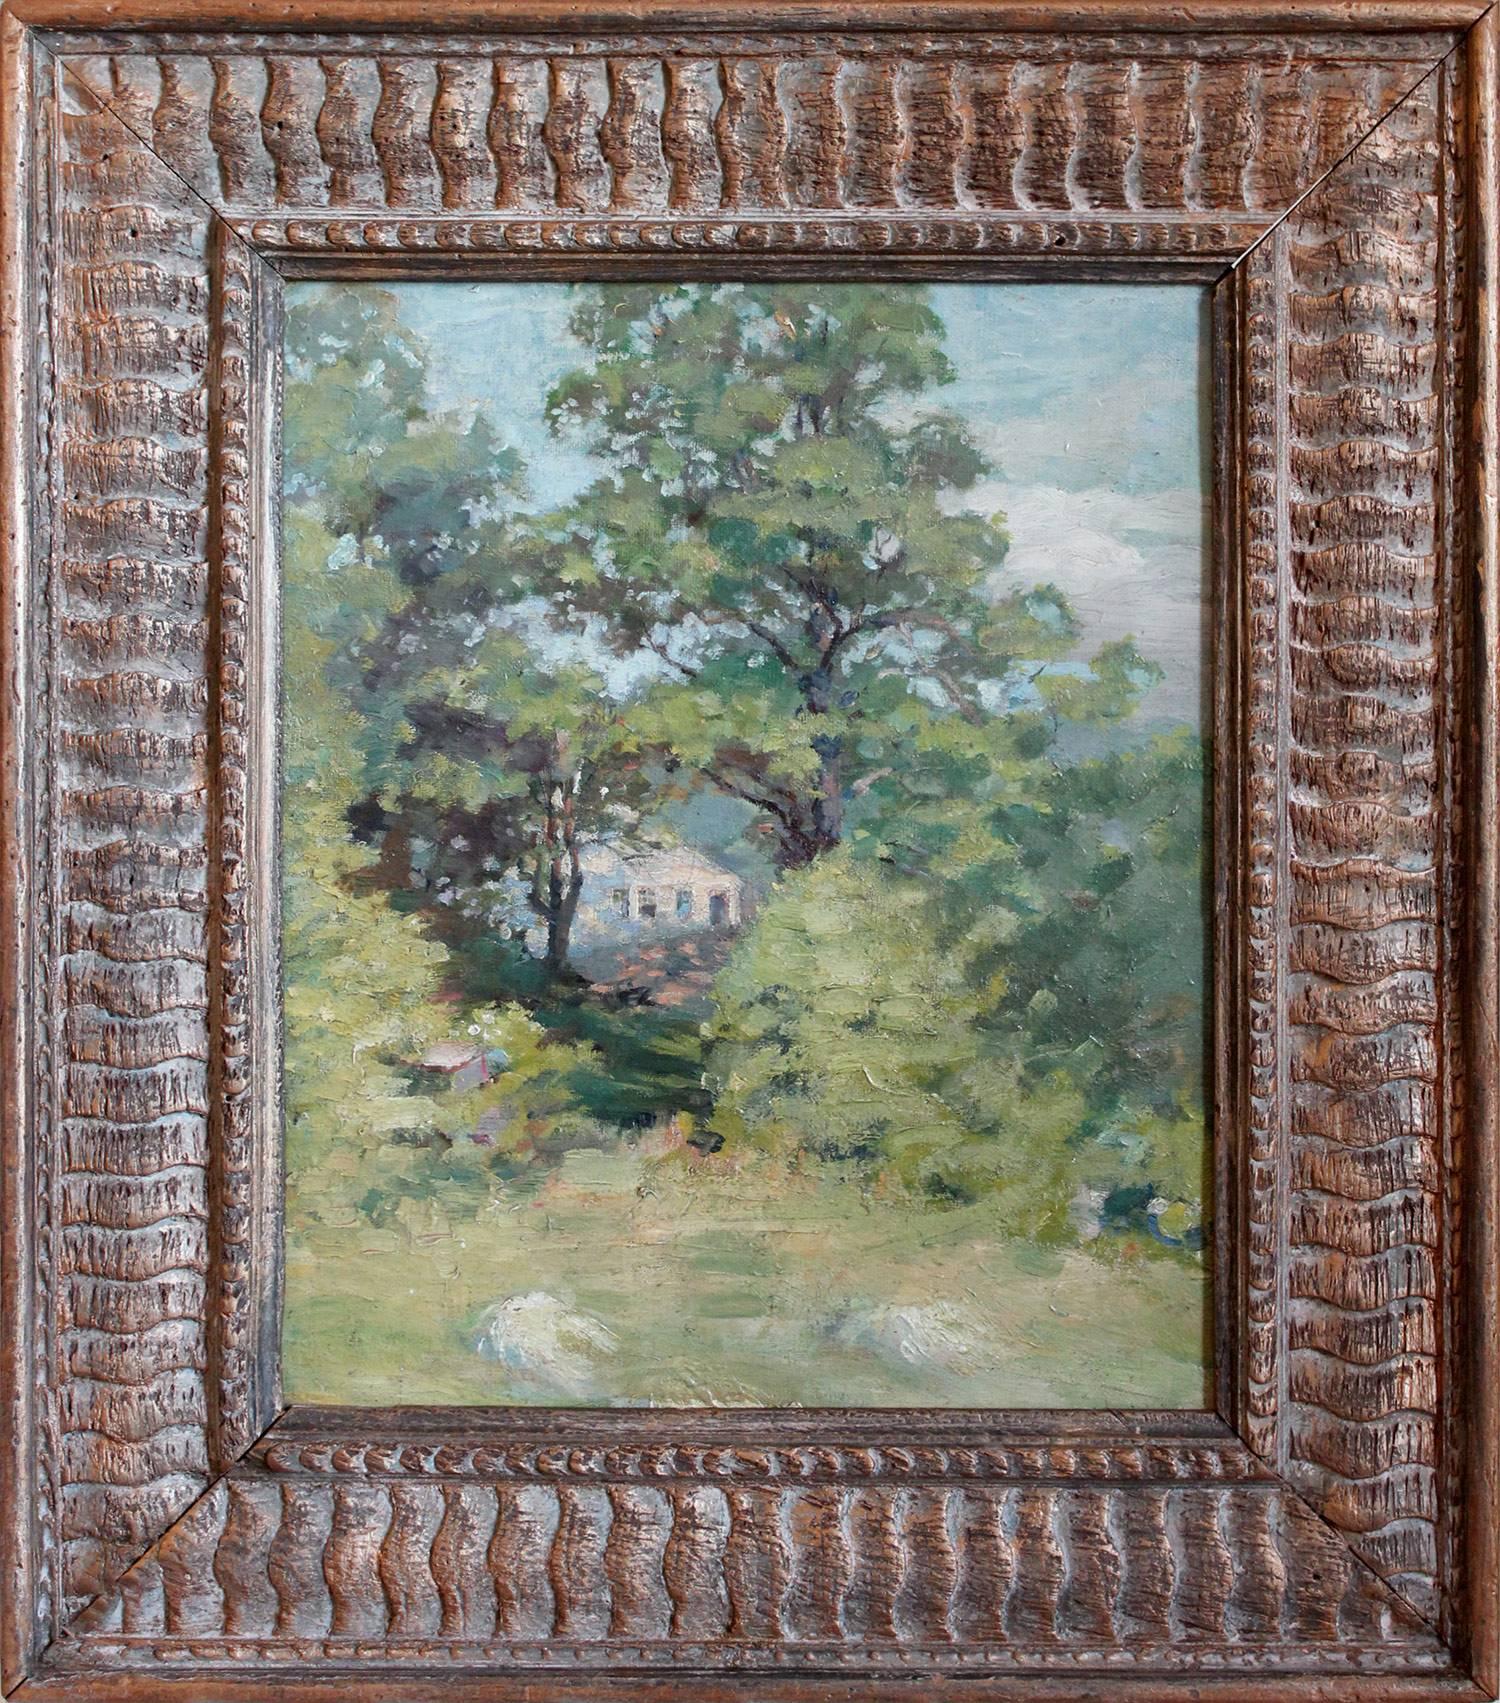 "The Germer House, Mason N.H." American Impressionistic Oil Painting Landscape